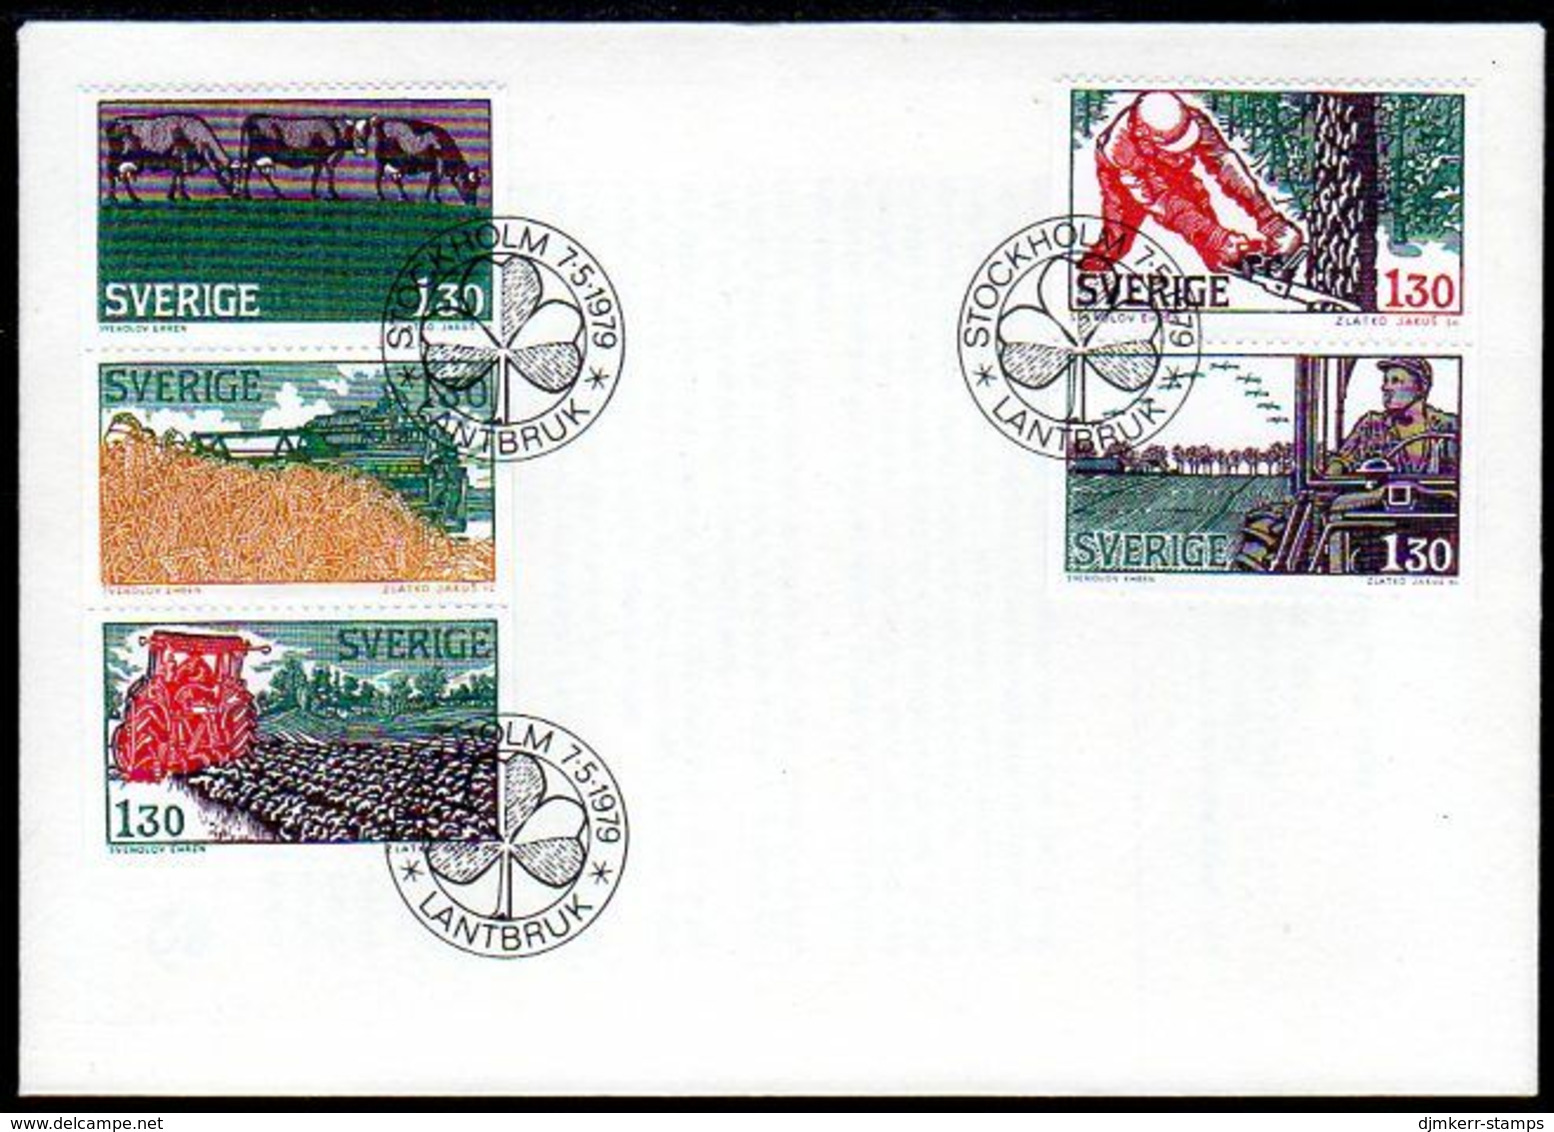 SWEDEN 1979 Agriculture And Forestry FDC.  Michel 1060-64 - FDC